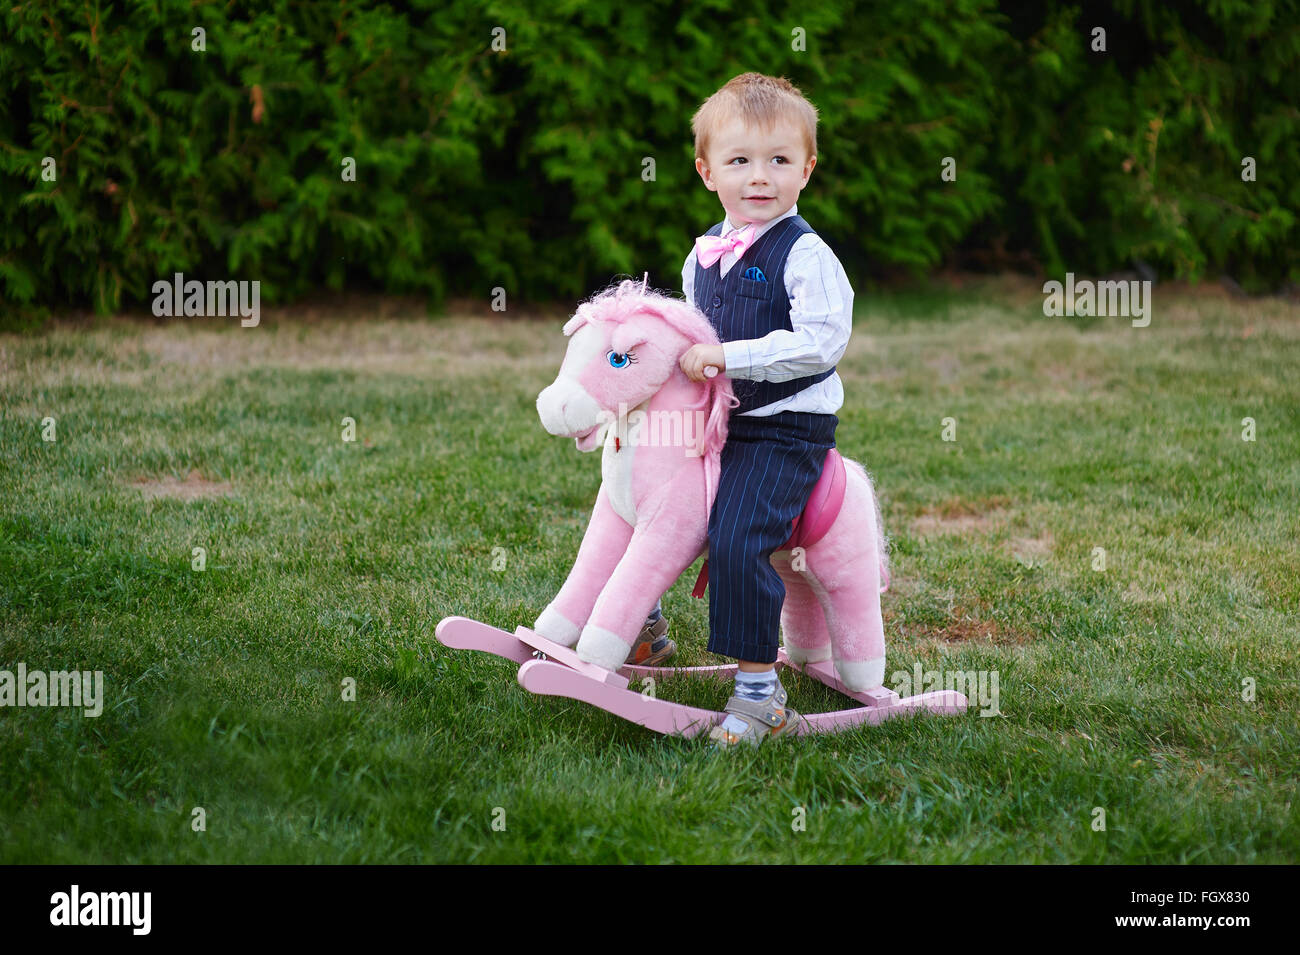 Baby boy playing with horse on playground in park Stock Photo